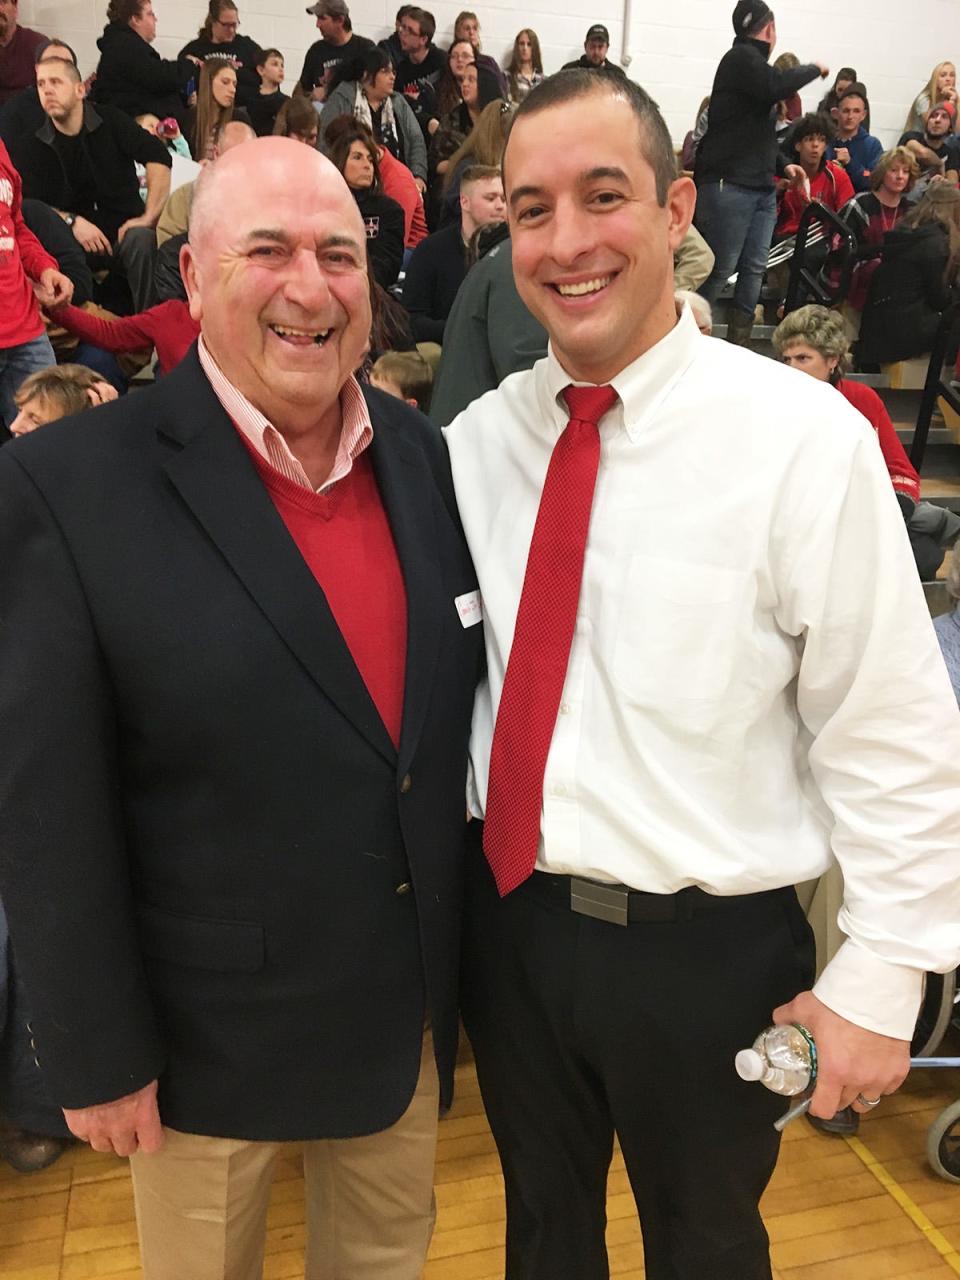 Jimmy Clift (left) was Honesdale's very first varsity wrestling coach. He's pictured here at the 50th anniversary of that inaugural team back in 2018. Also shown is current skipper Ryan Chulada.